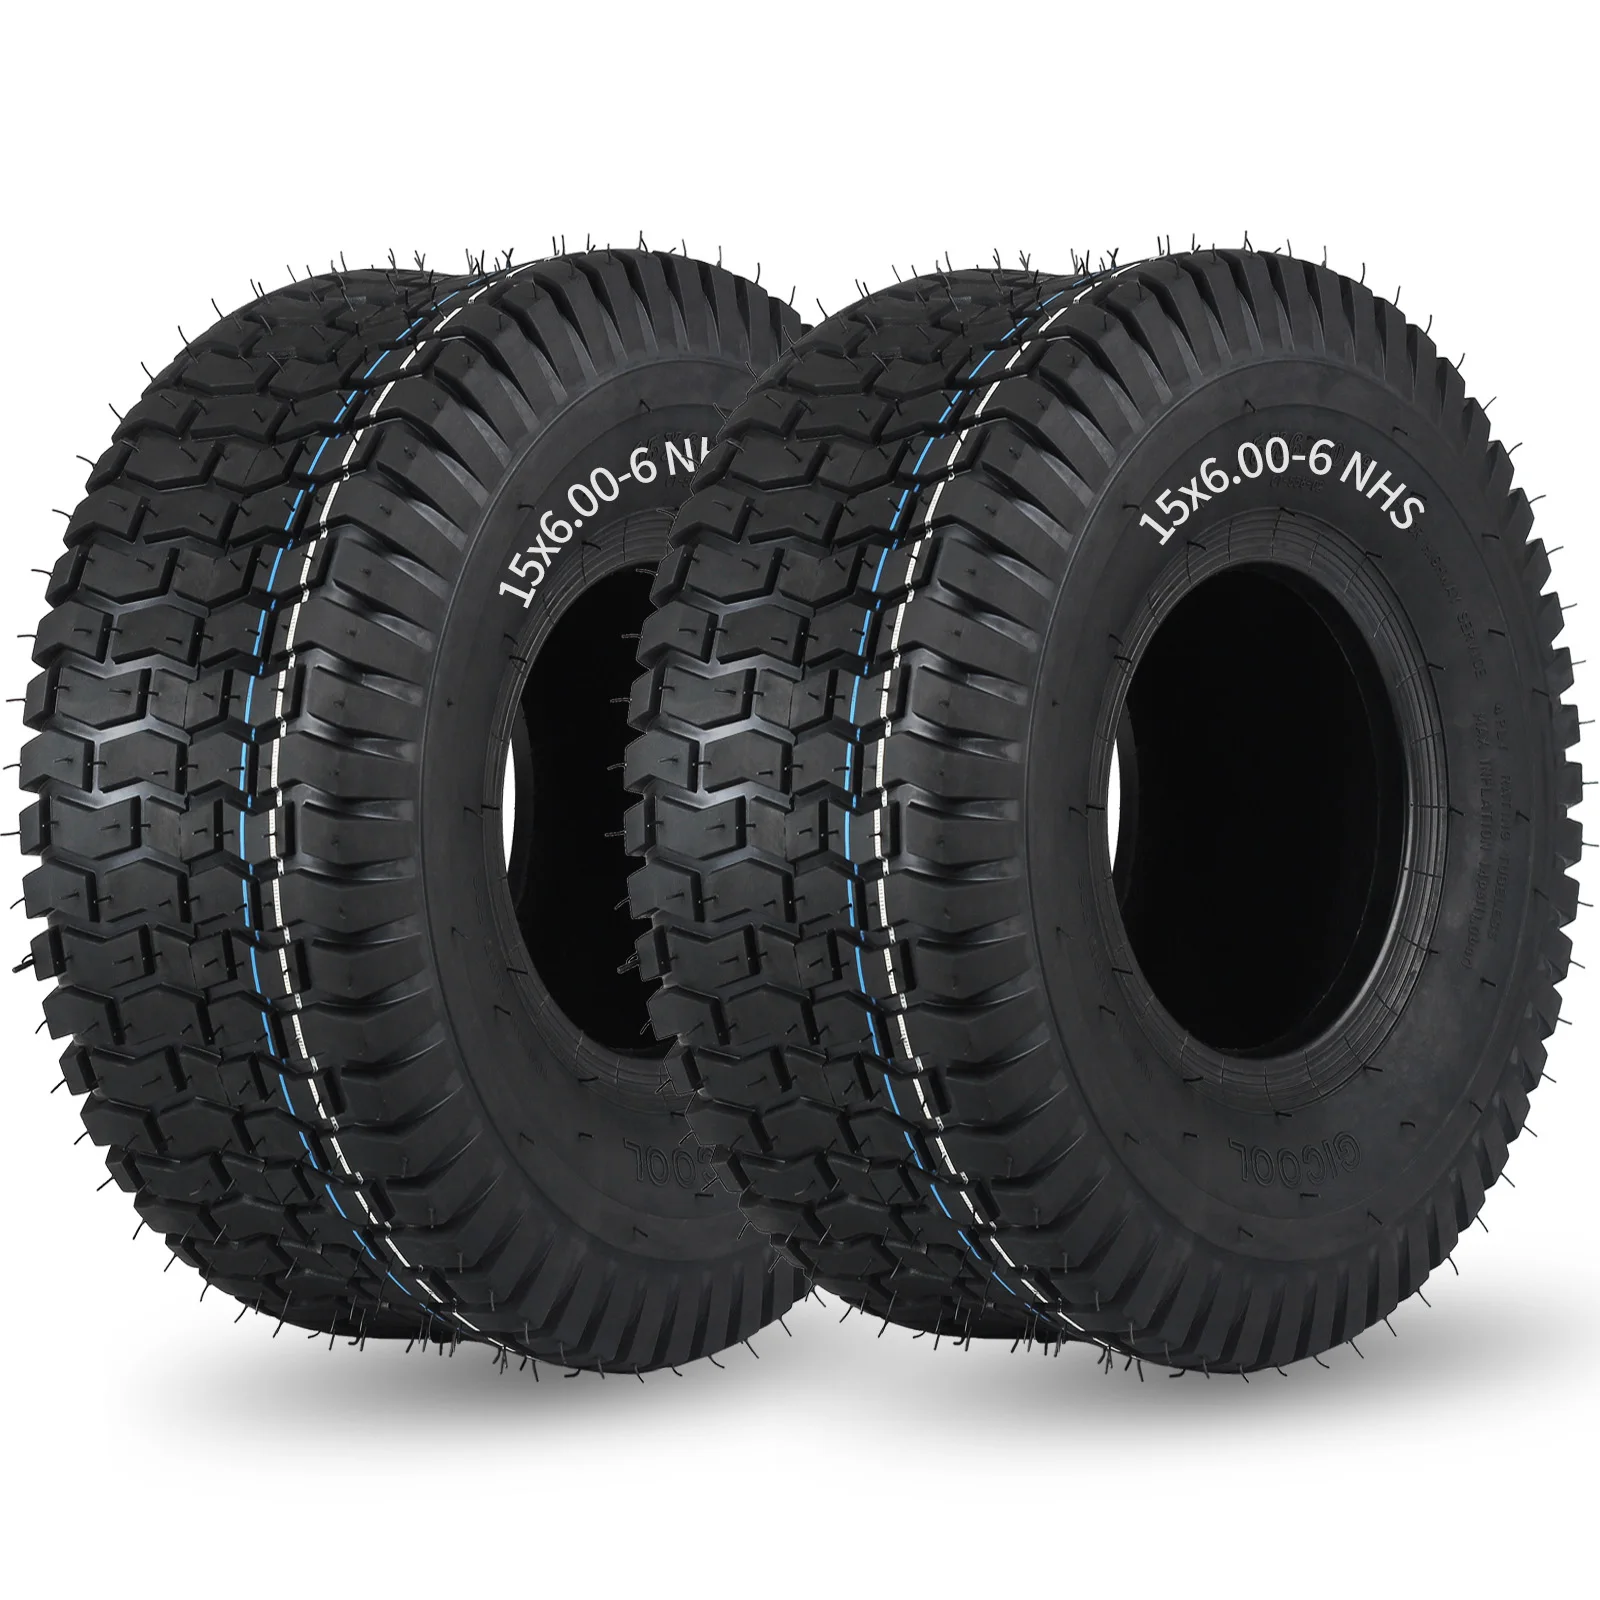 15x6.00-6 Lawn Mower Tubeless Tire, 15 x 6.00-6 Turf-V Pattern Tubeless Tire and Wheel for Tractor Riding Lawnmowers